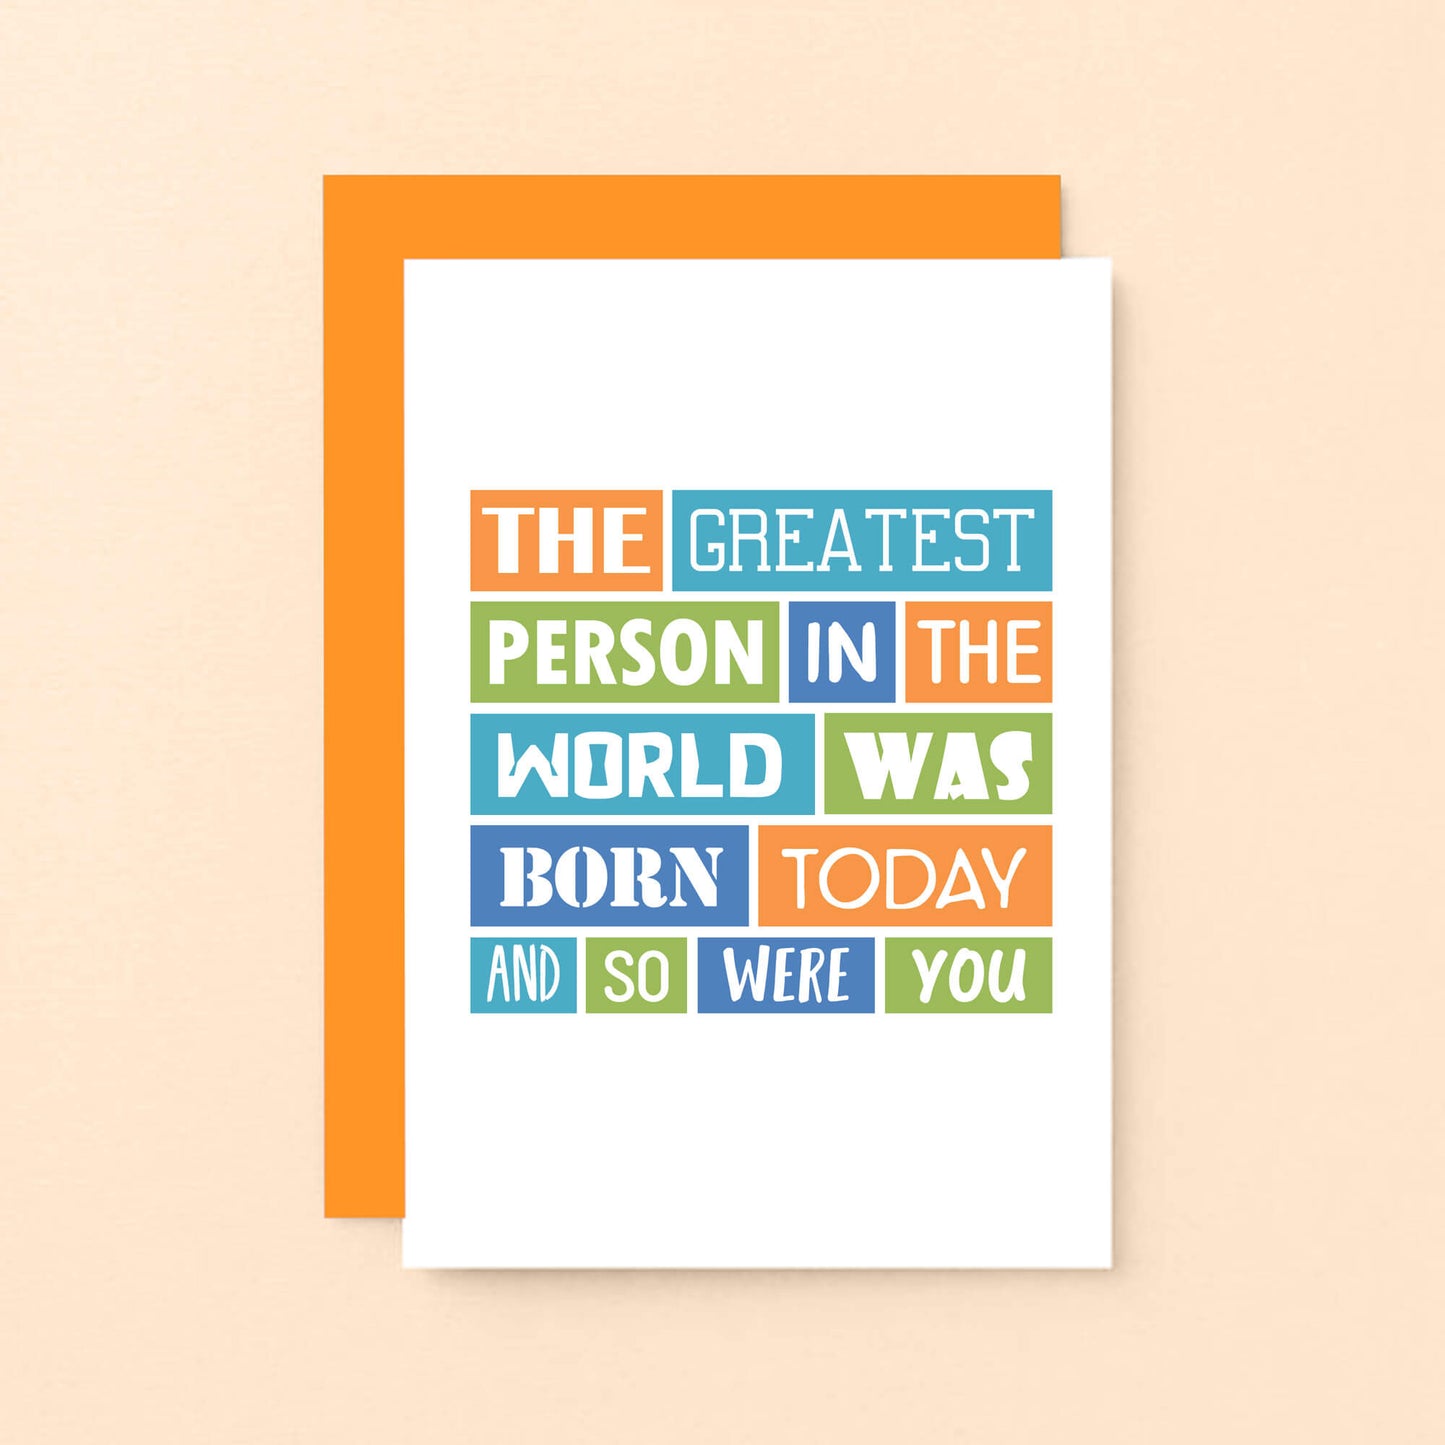 Funny Birthday Card by SixElevenCreations. Reads The greatest person in the world was born today and so were you. Product Code SE0055A6